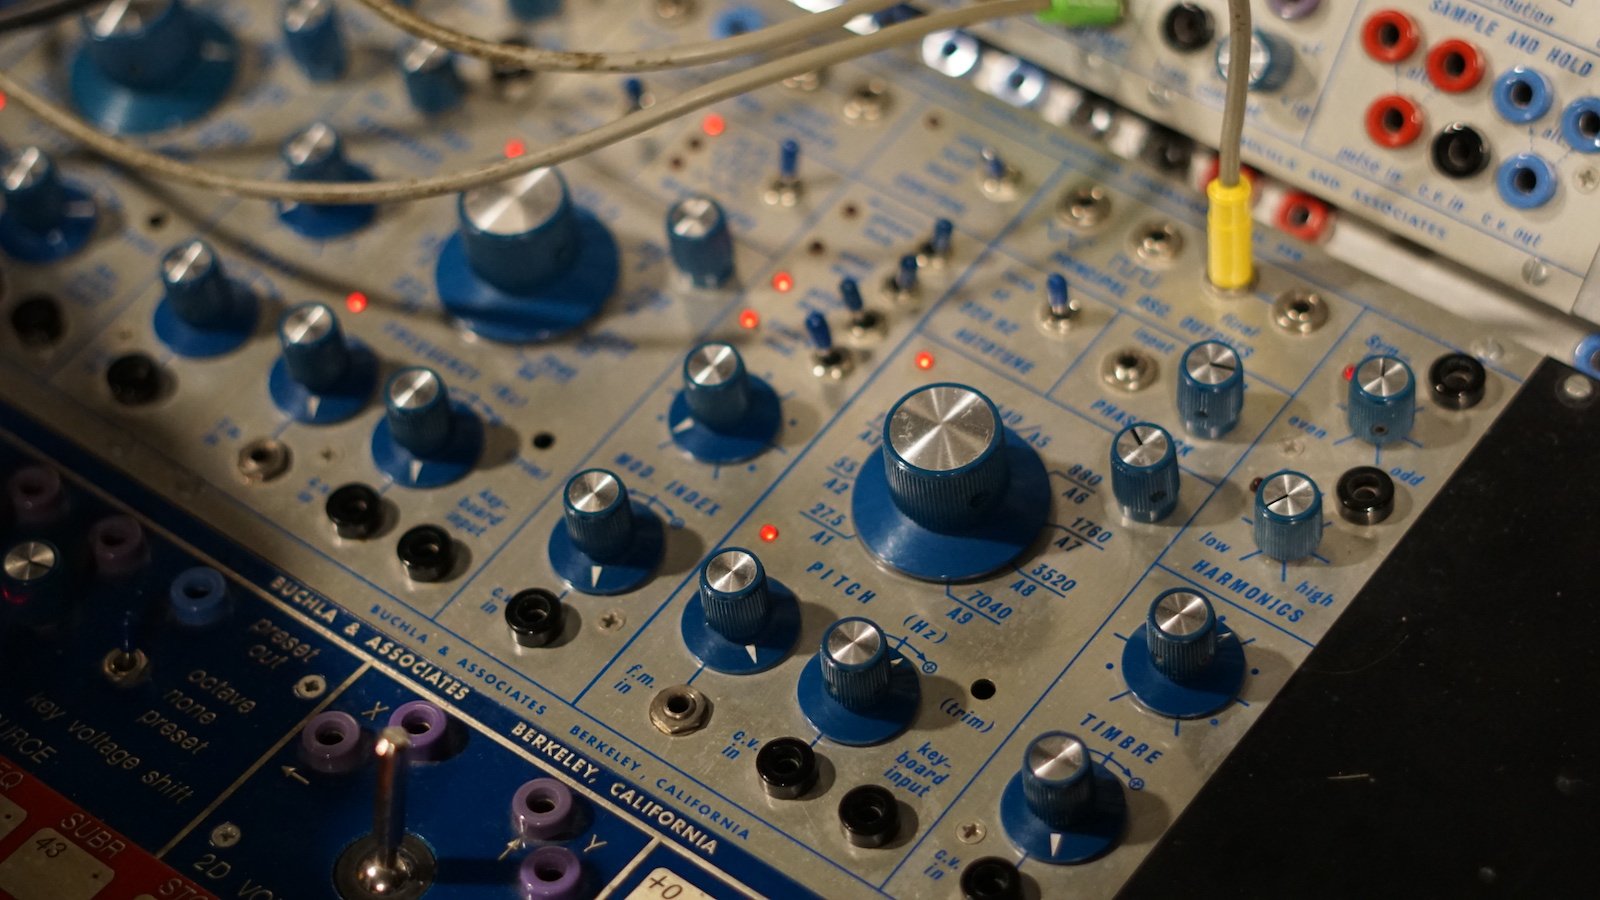 An original vintage Buchla 259 Programmable Complex Waveform Generator in the University of Victoria 200 Series System